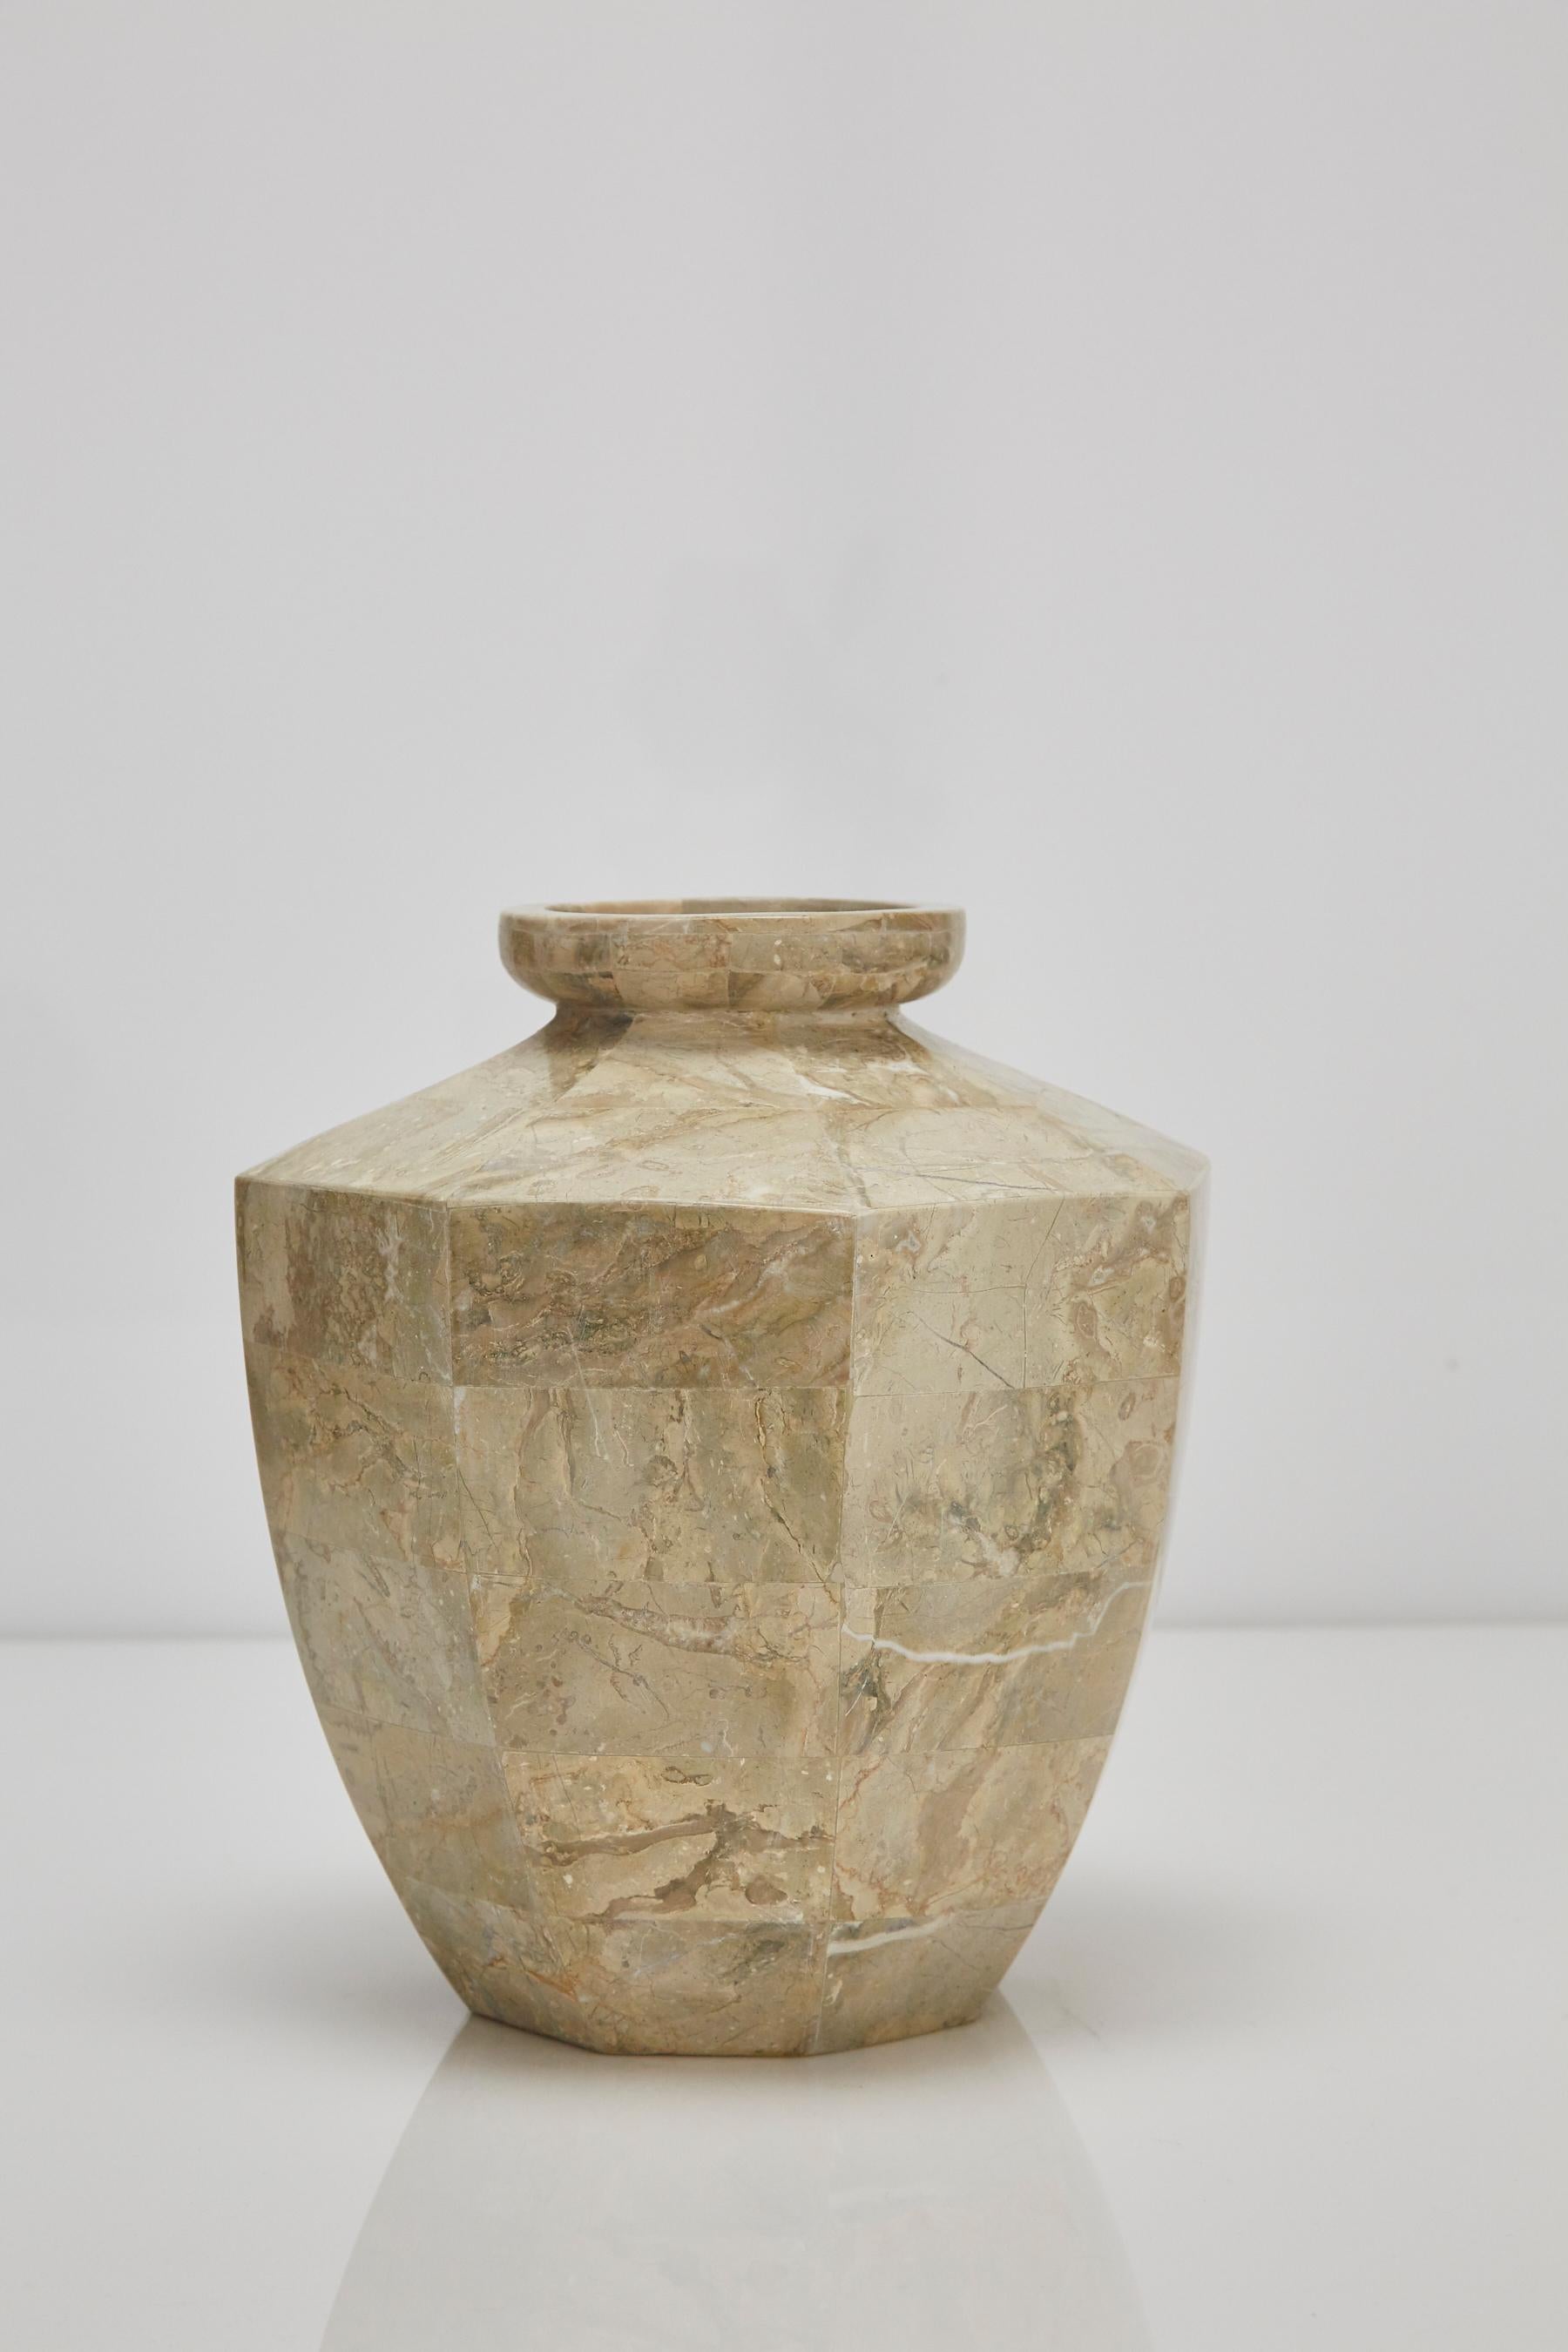 Philippine Short Octagonal Vase in Tessellated Cantor Stone, 1990s For Sale